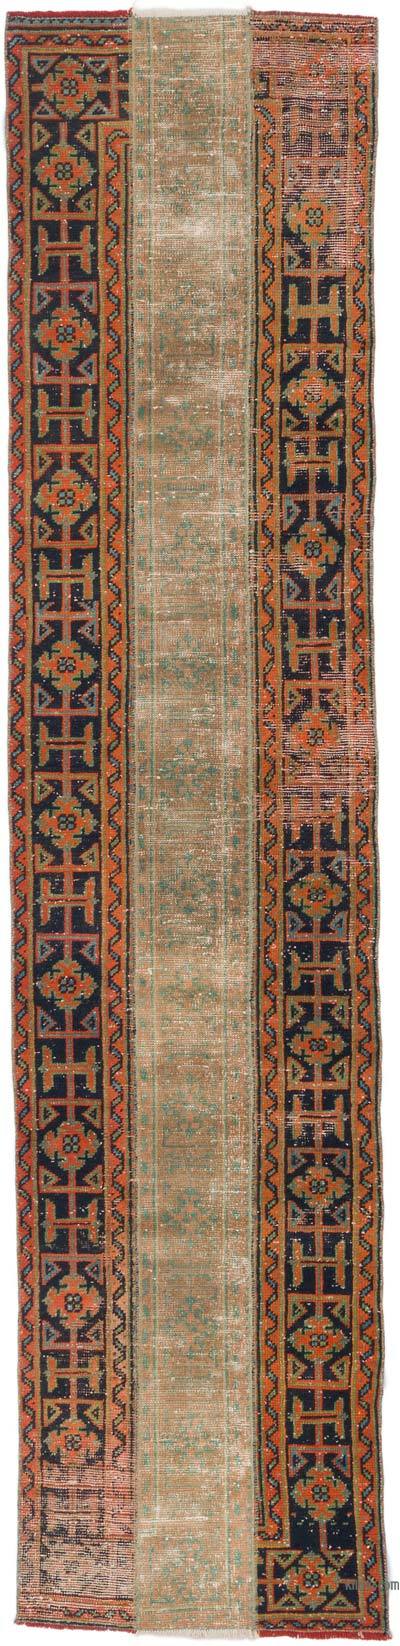 Vintage Turkish Hand-Knotted Runner - 2' 6" x 10' 10" (30 in. x 130 in.)